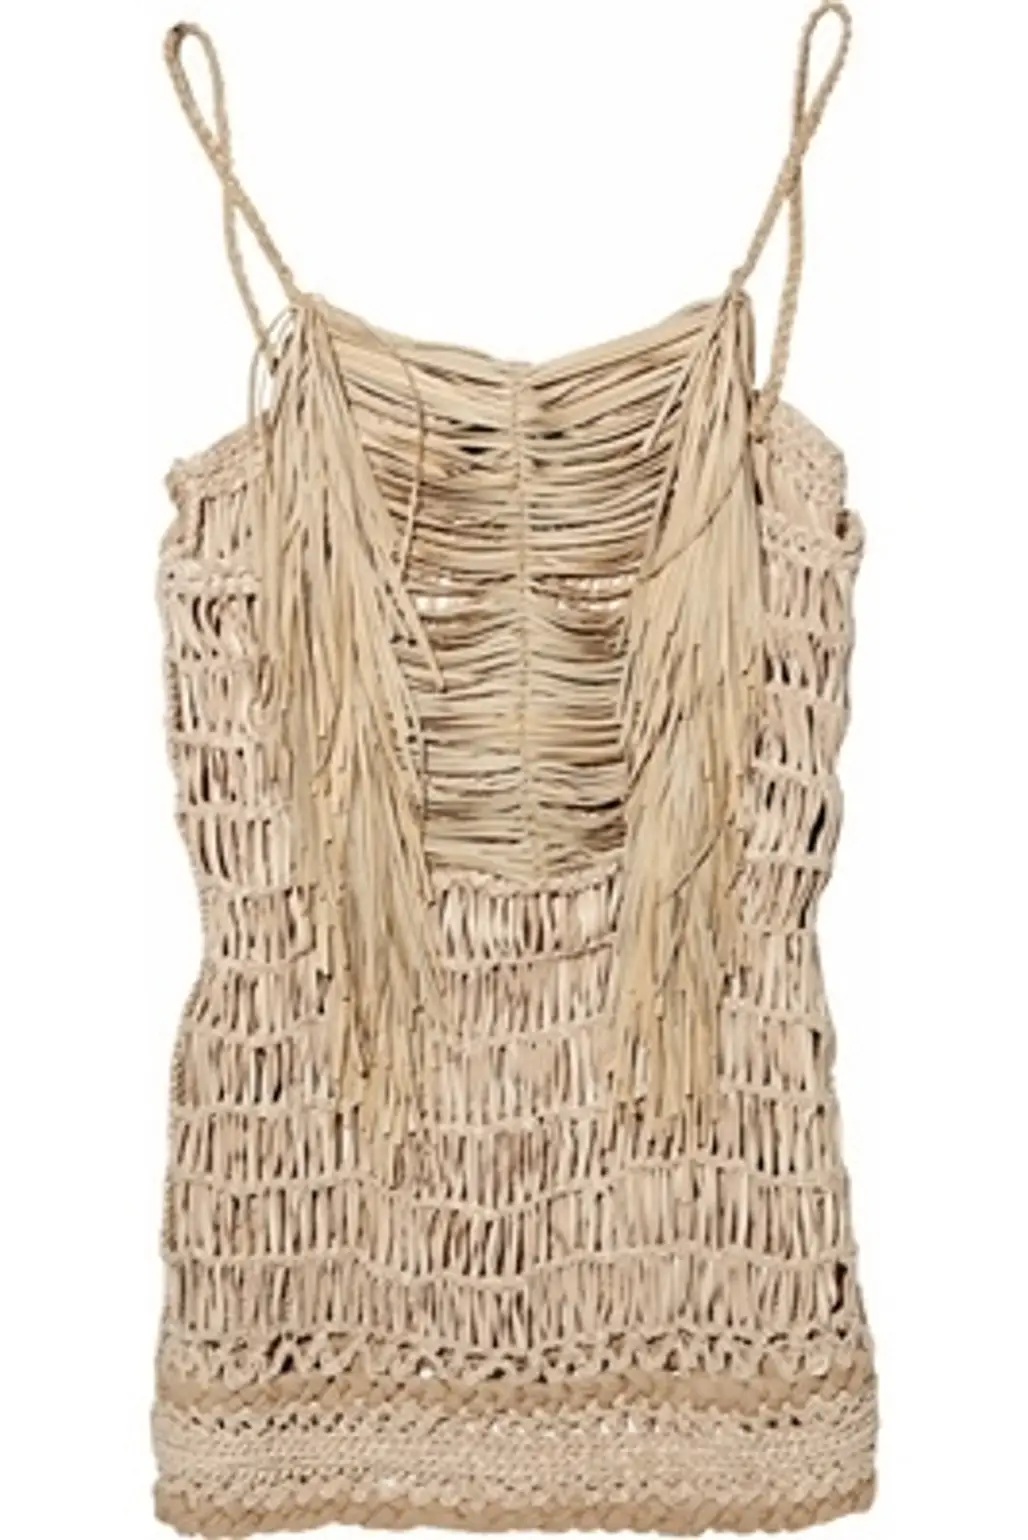 Gucci Macramé Woven Leather and Silk Top